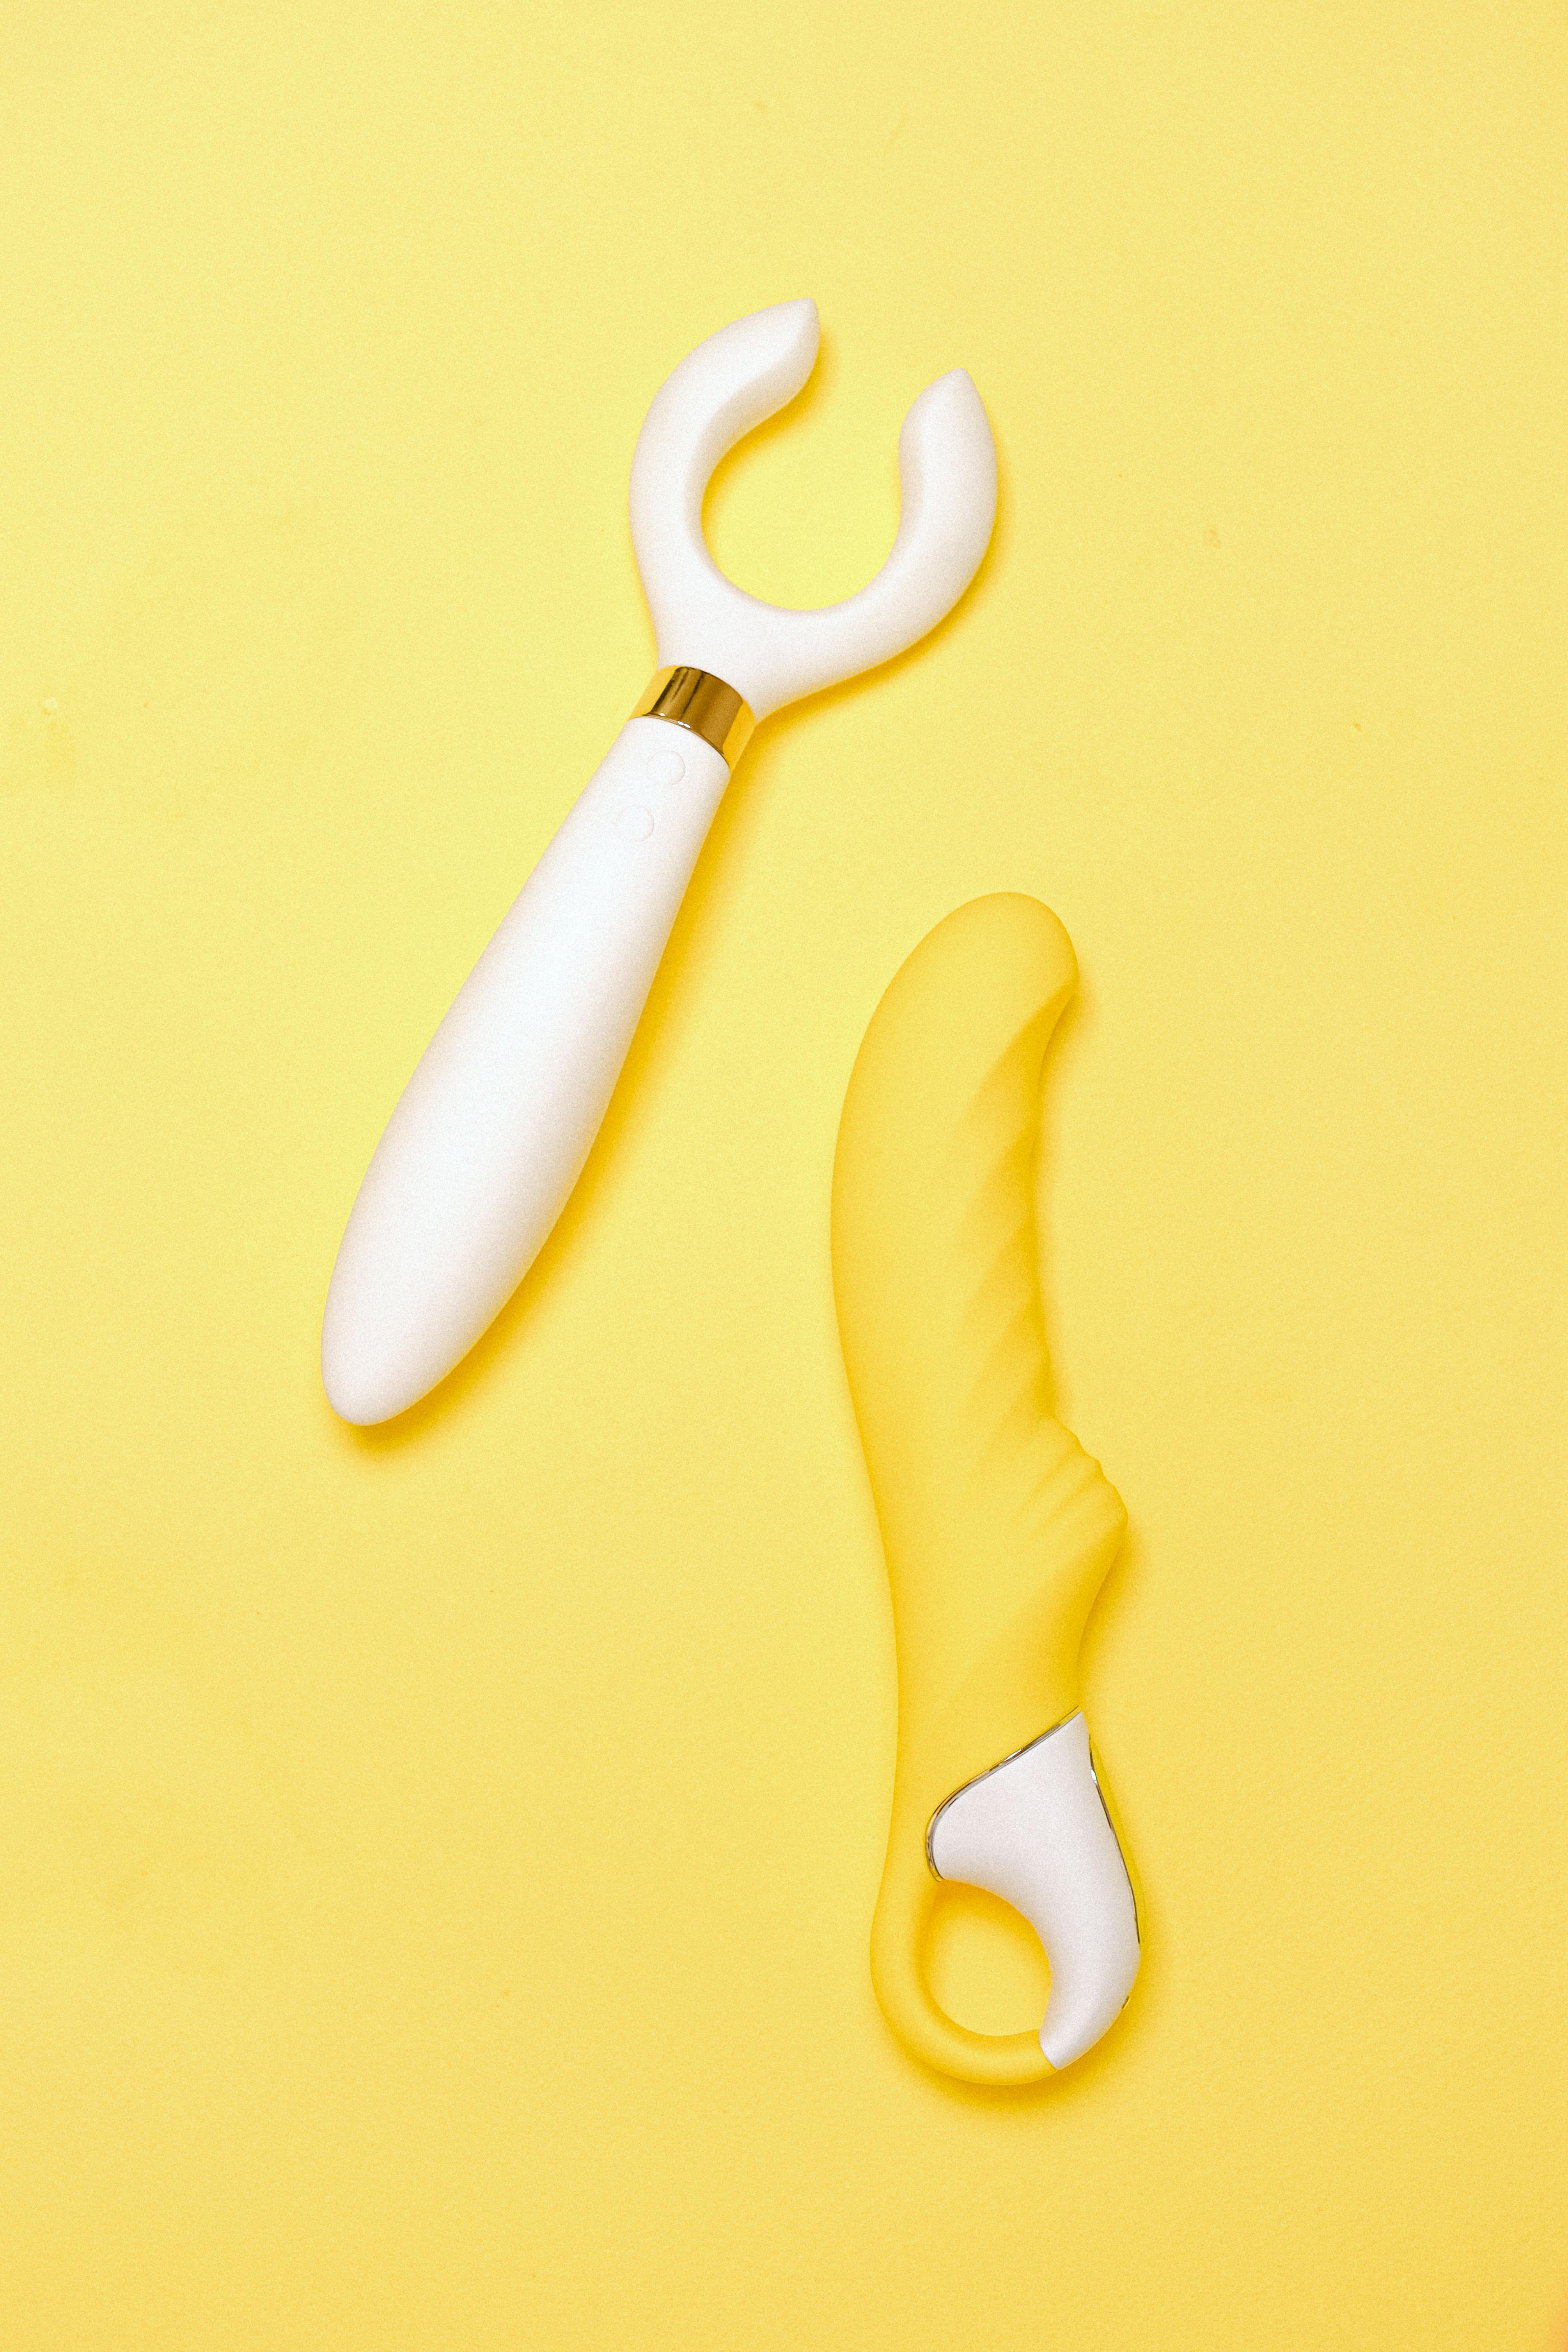 sex toys on a yellow background